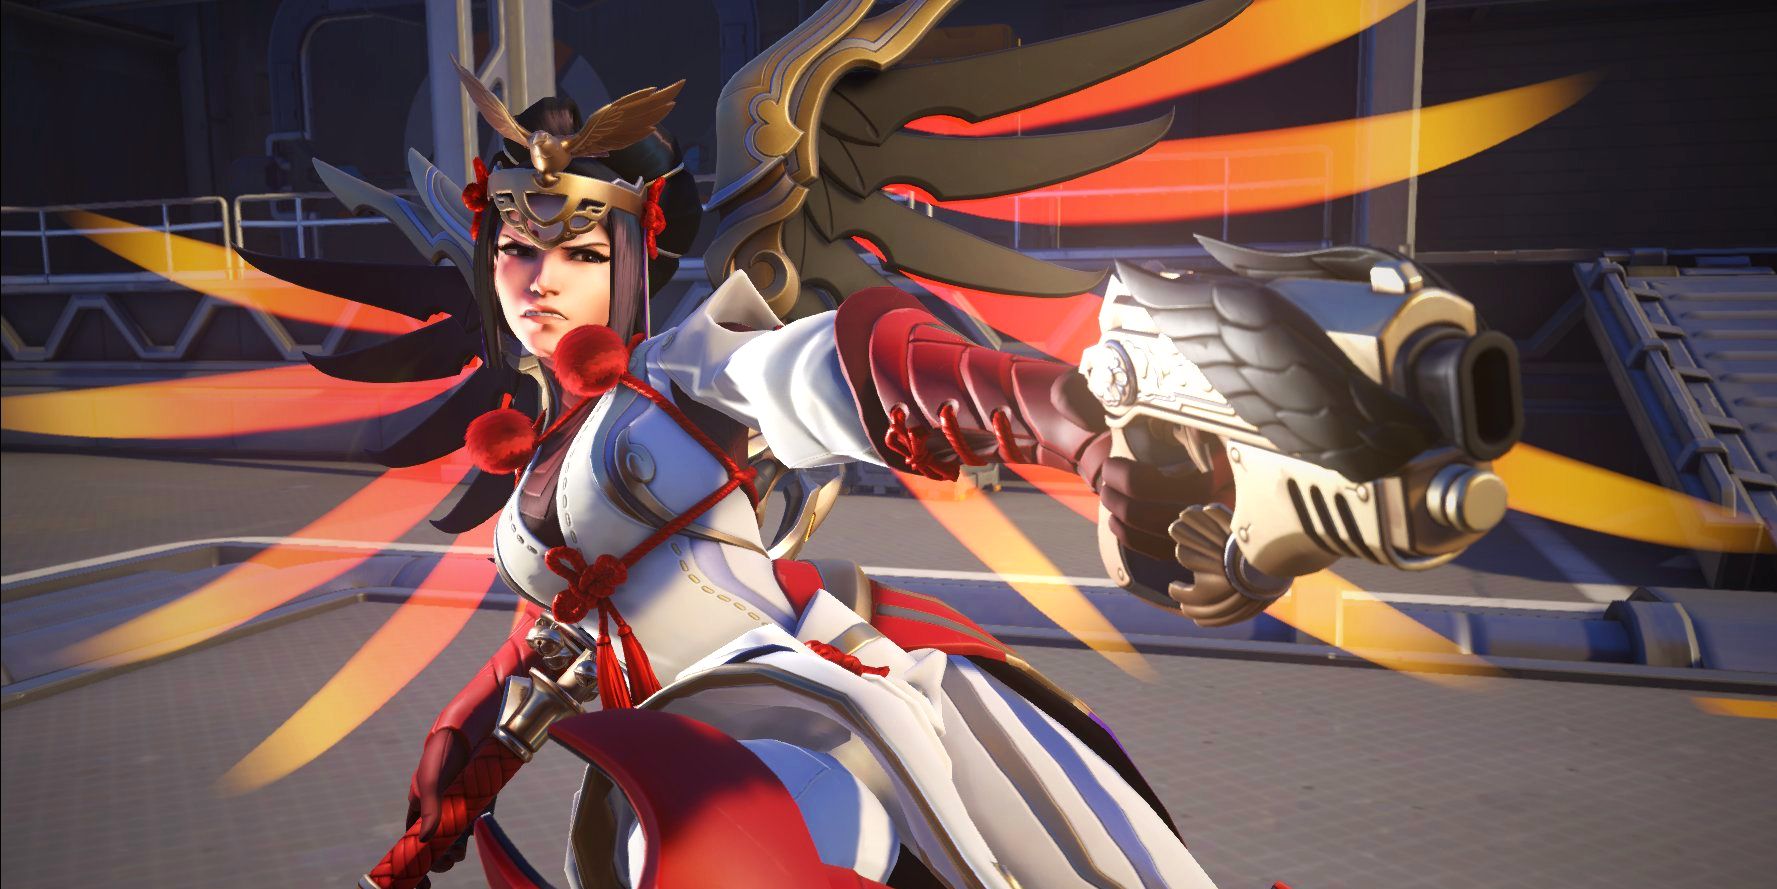 Overwatch 2's Mercy performing her Battle Angel highlight intro in her new Miko skin.